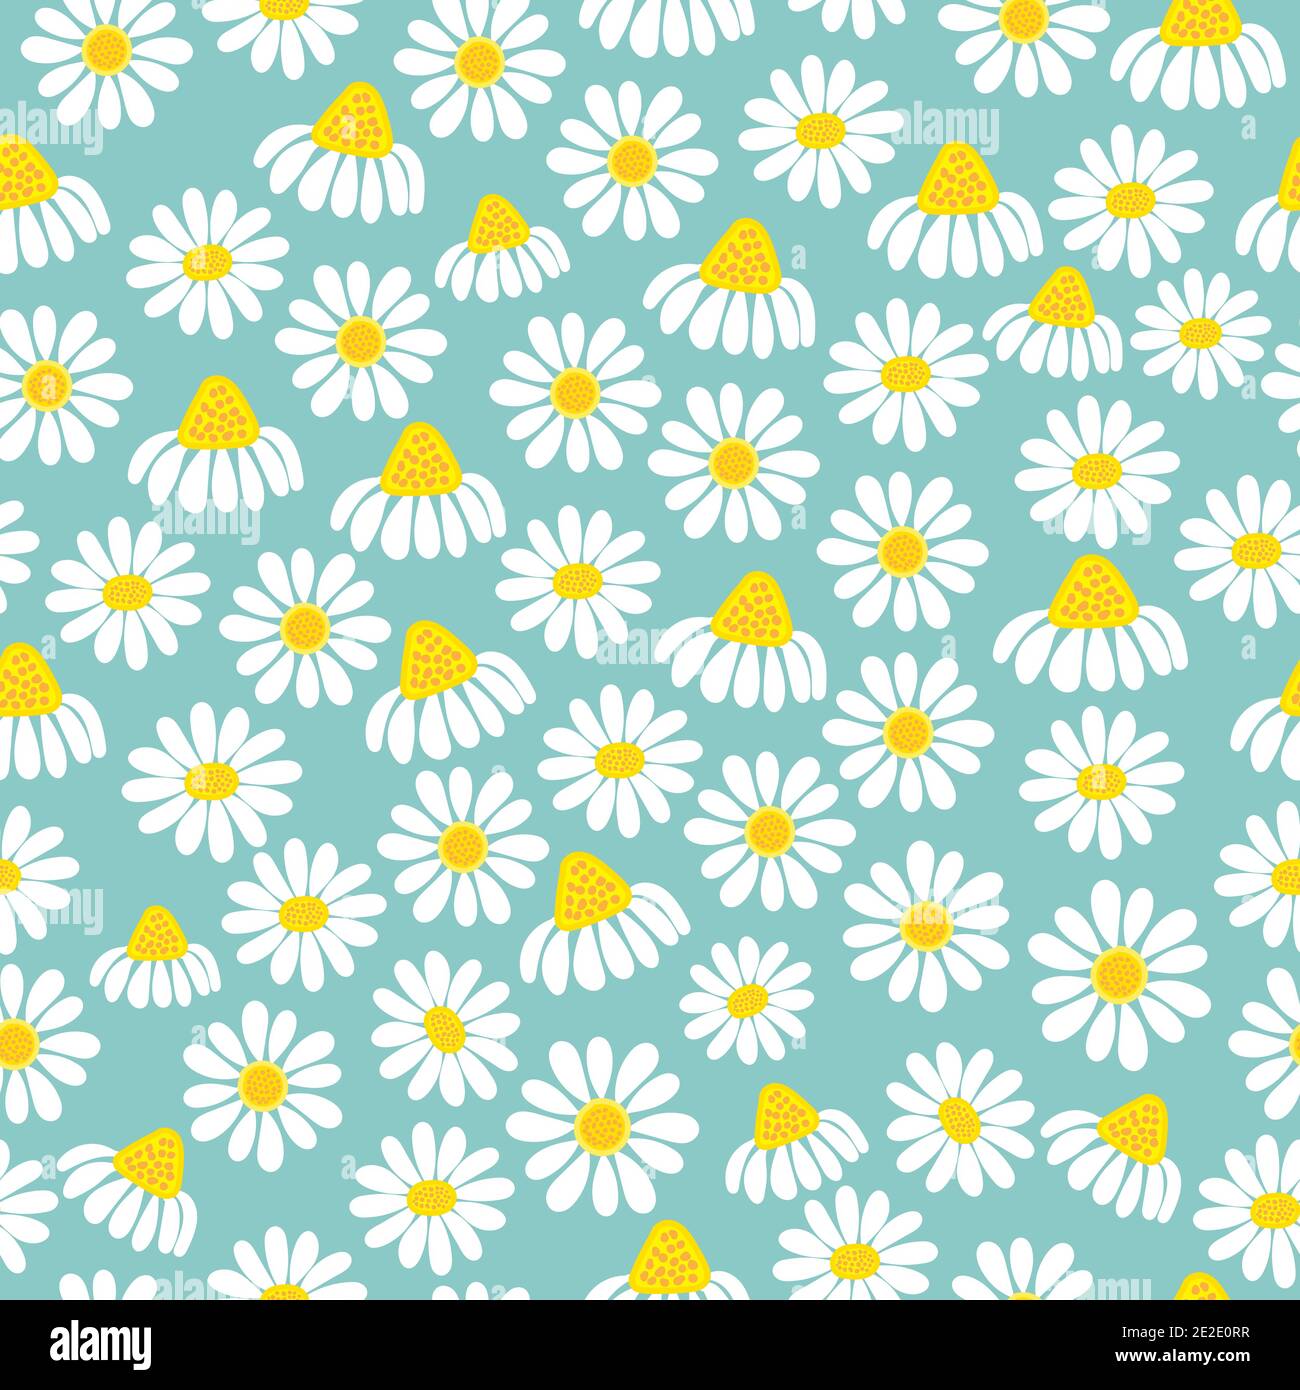 Hand drawn common lawn daisy flowers vector floral seamless pattern design for textile and printing- Elegant ditsy floral texture background Stock Vector